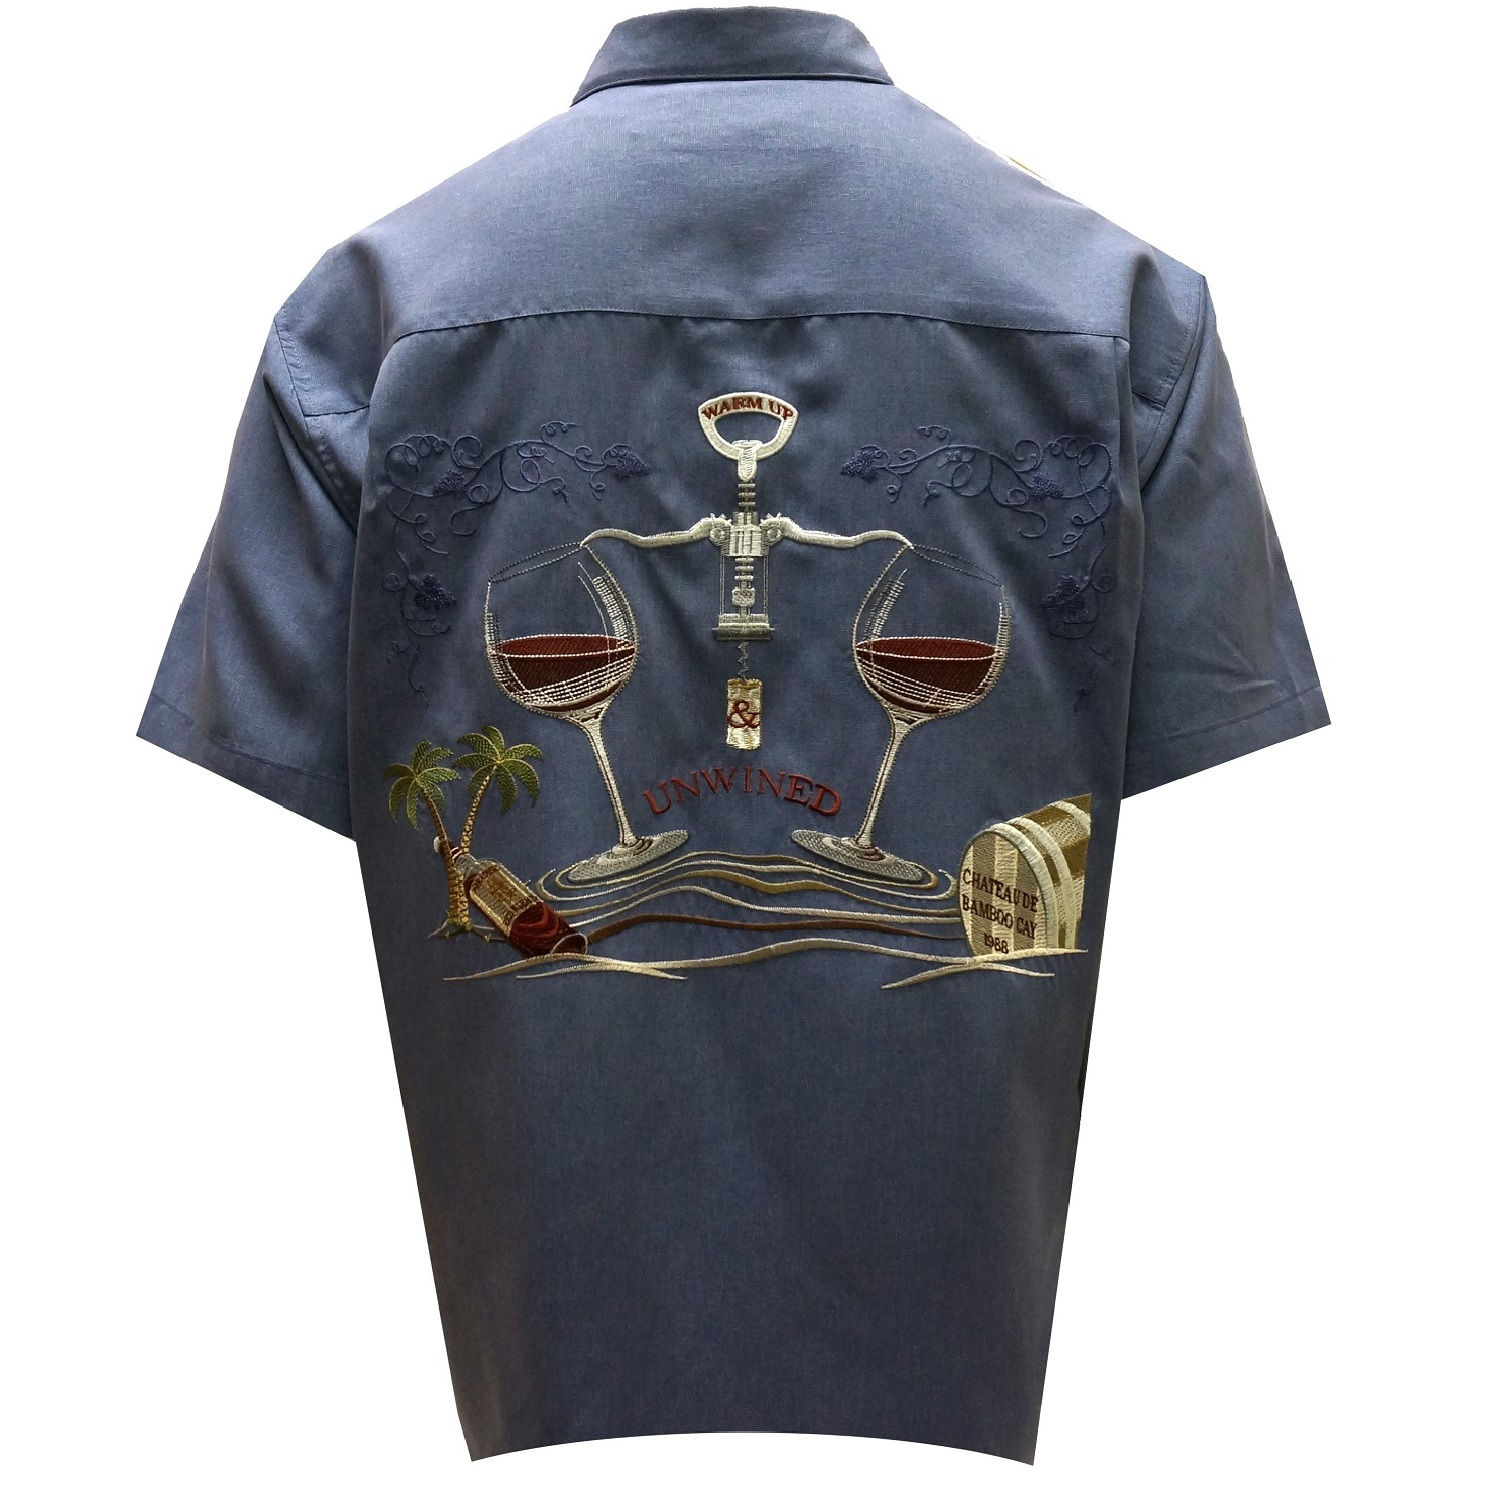 Bamboo Cay – Mens Shirt – Relax & Unwined- Infra blue -Back view